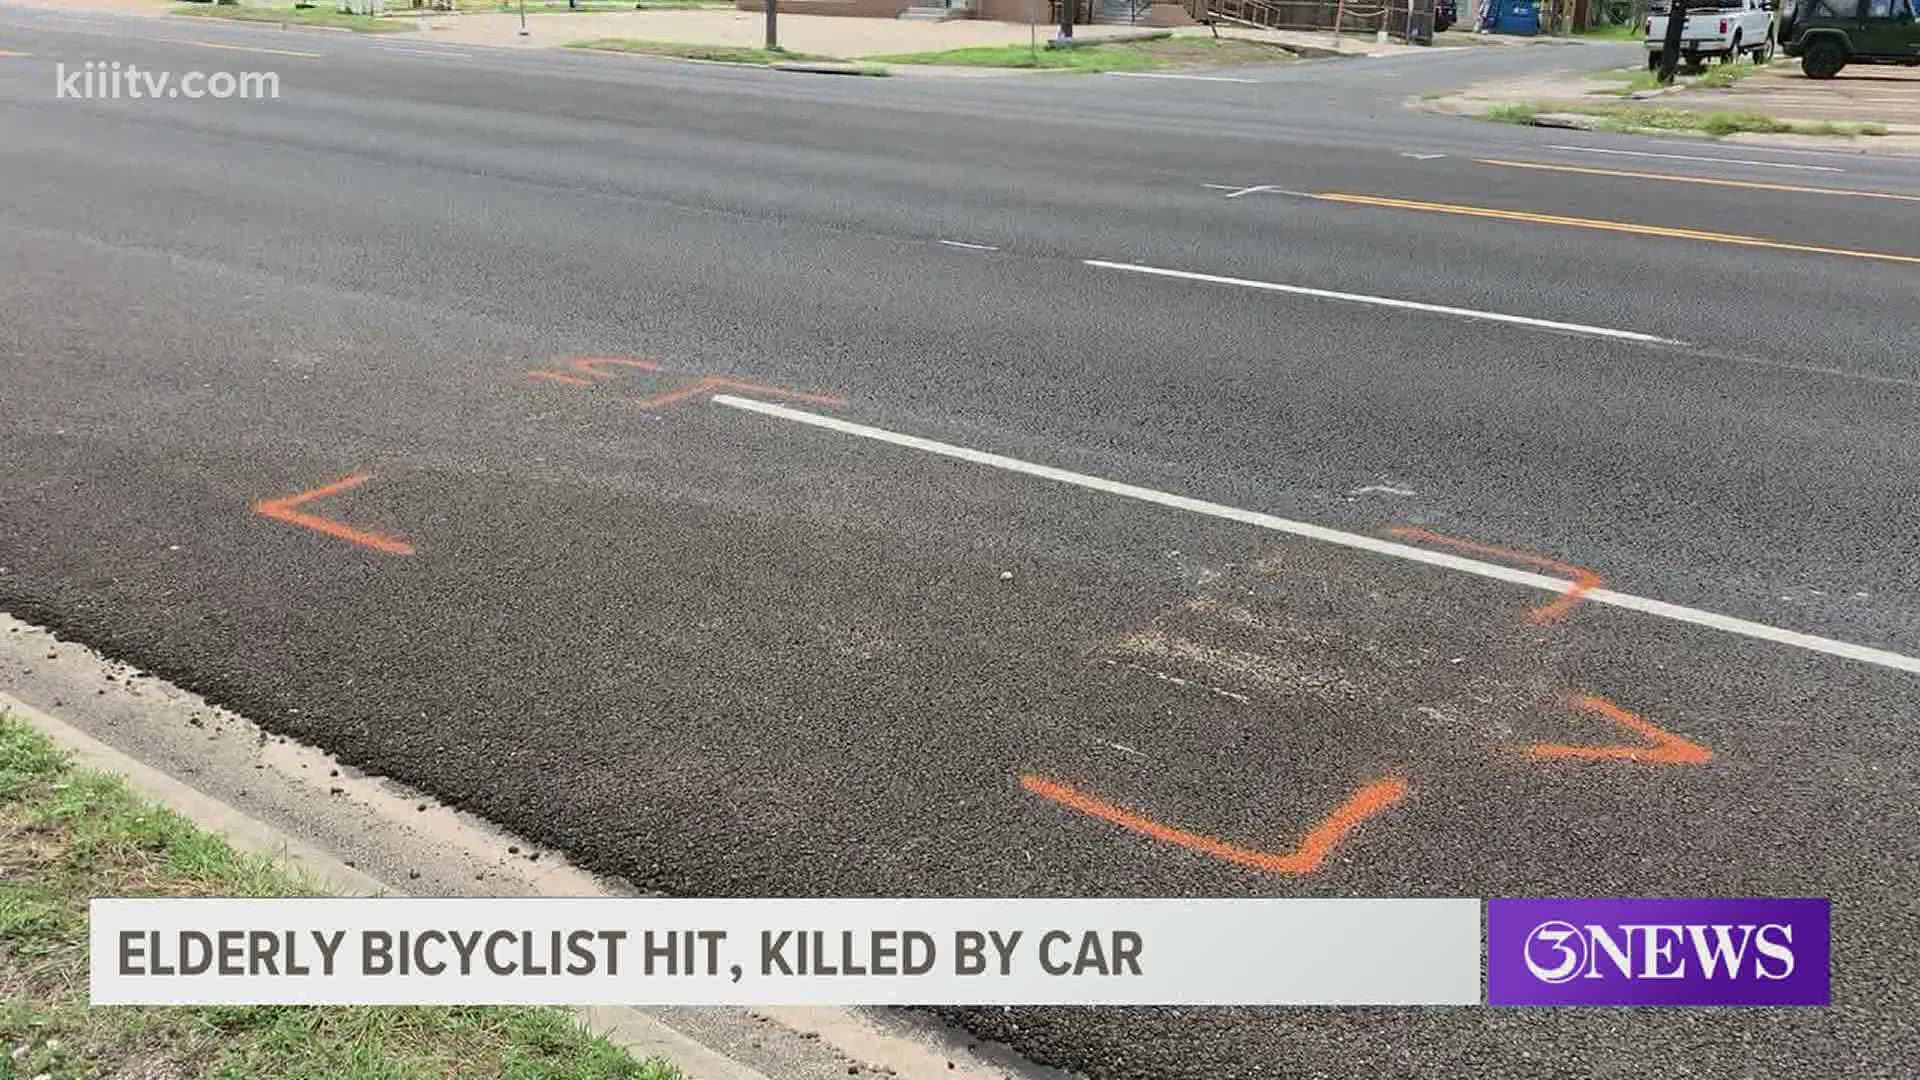 An investigation found the bicyclist was in the left lane of the road and was at fault for the accident.